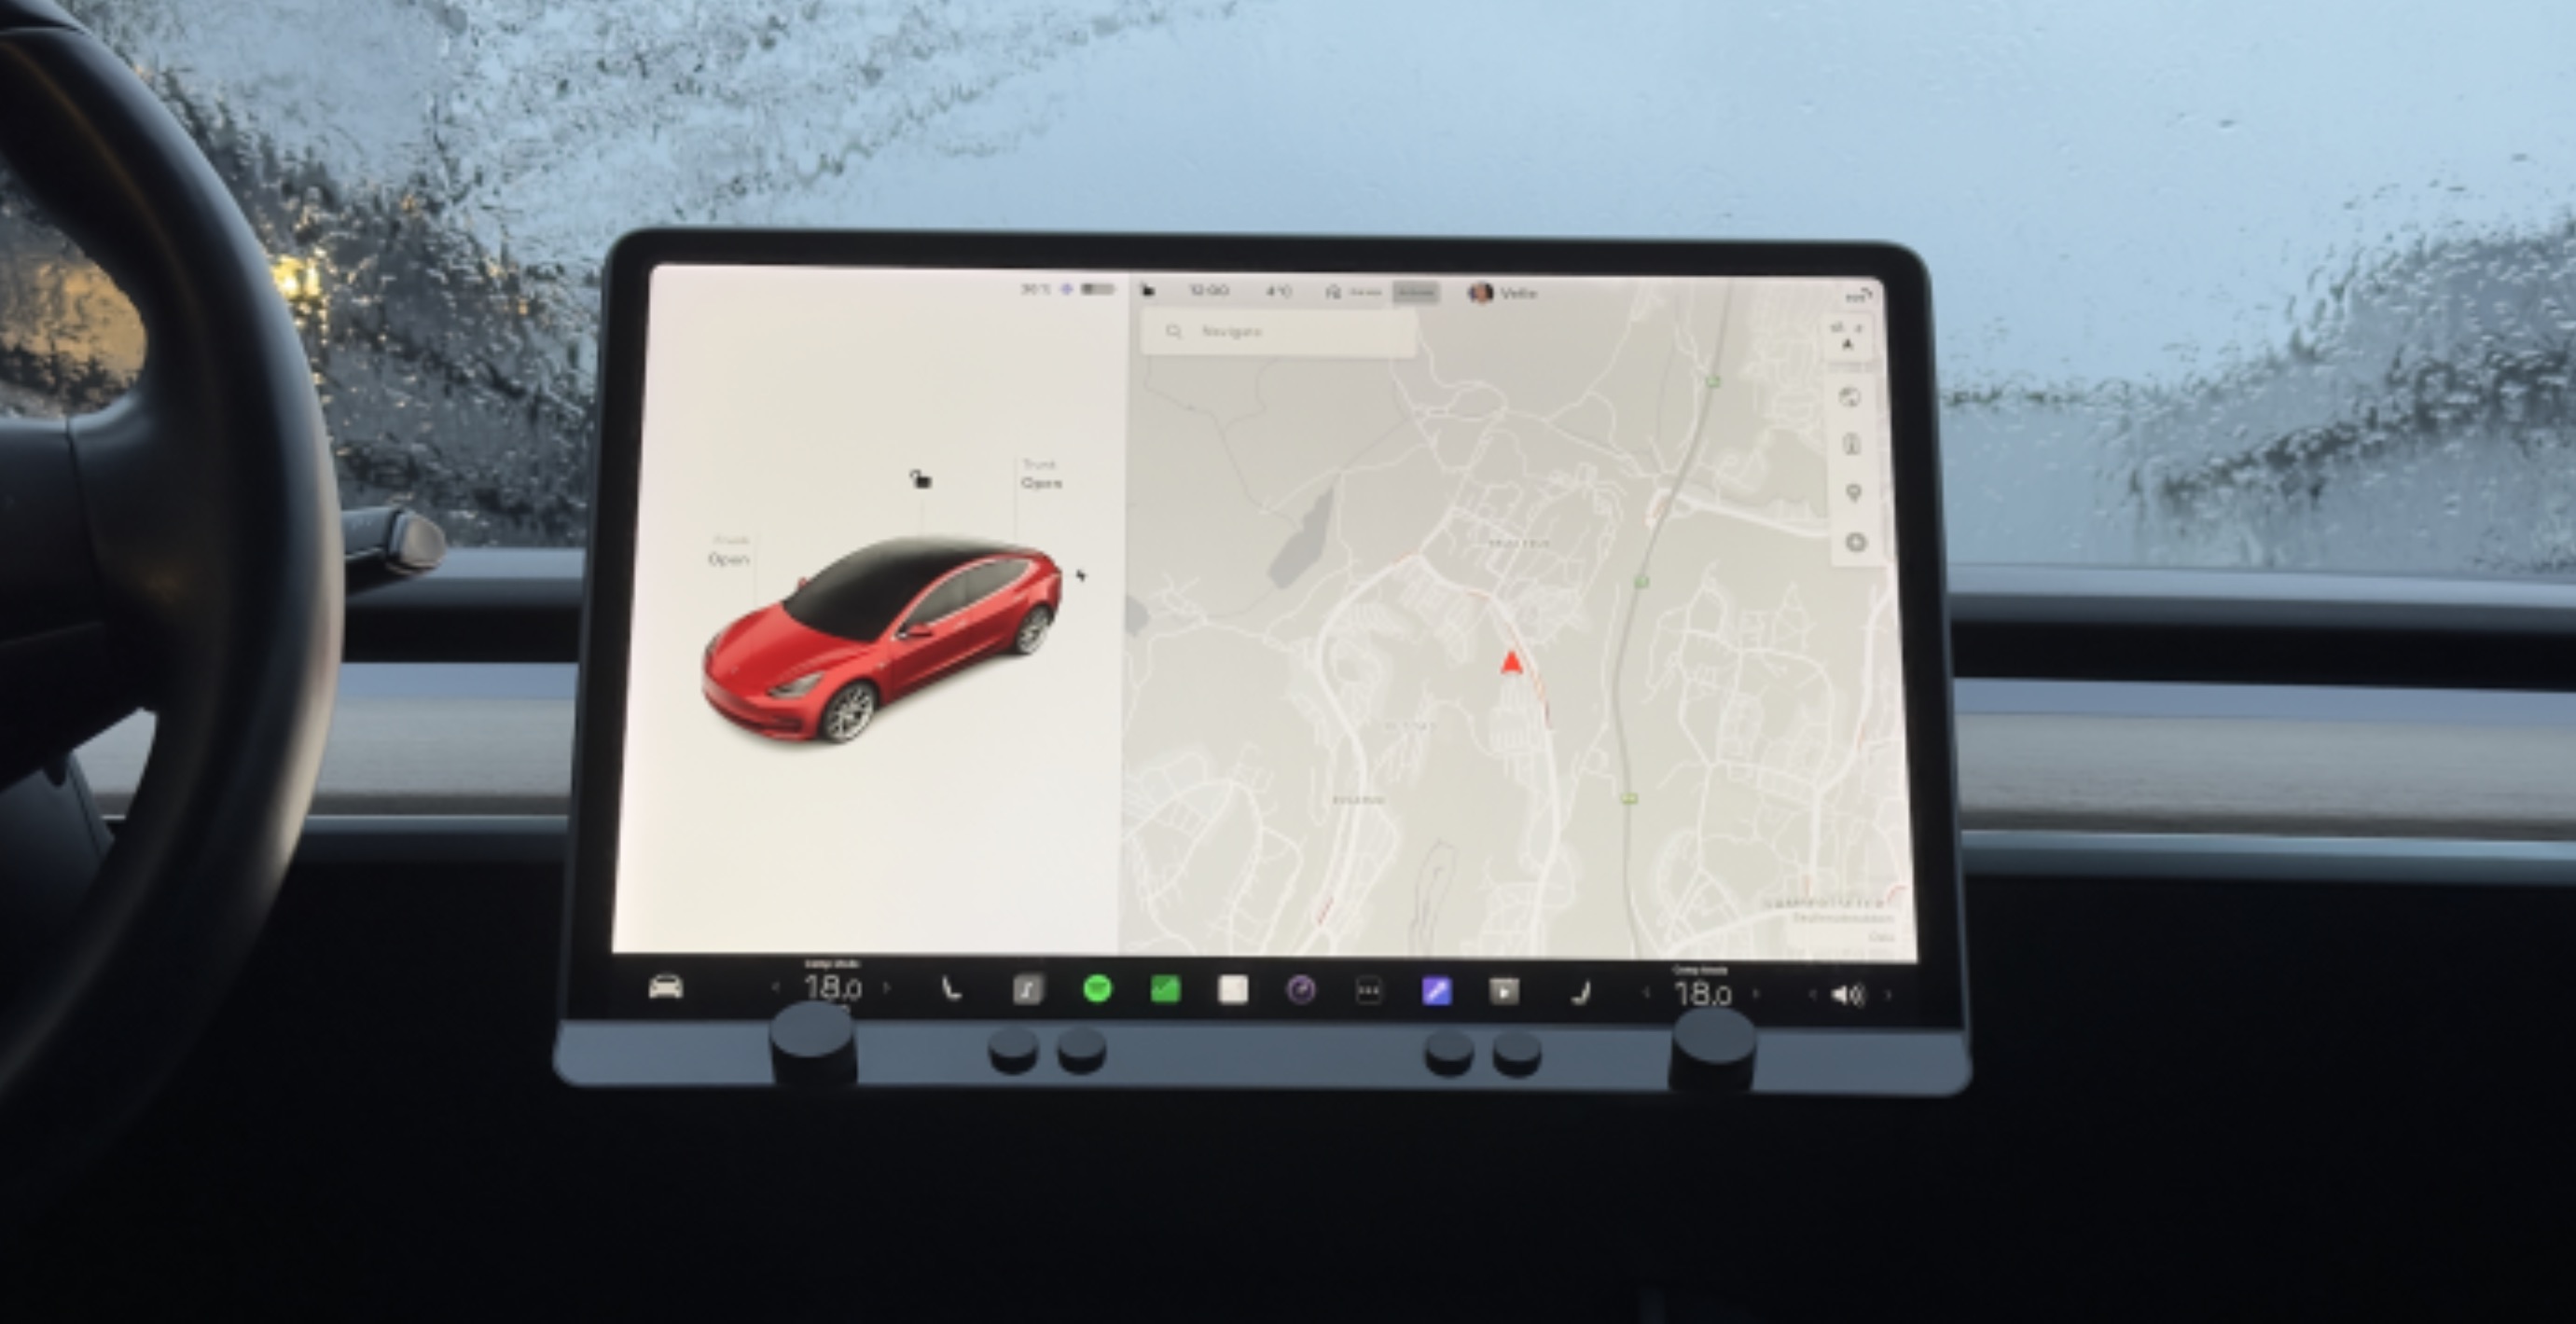 Tesla finally gets buttons and physical inputs, thanks to new